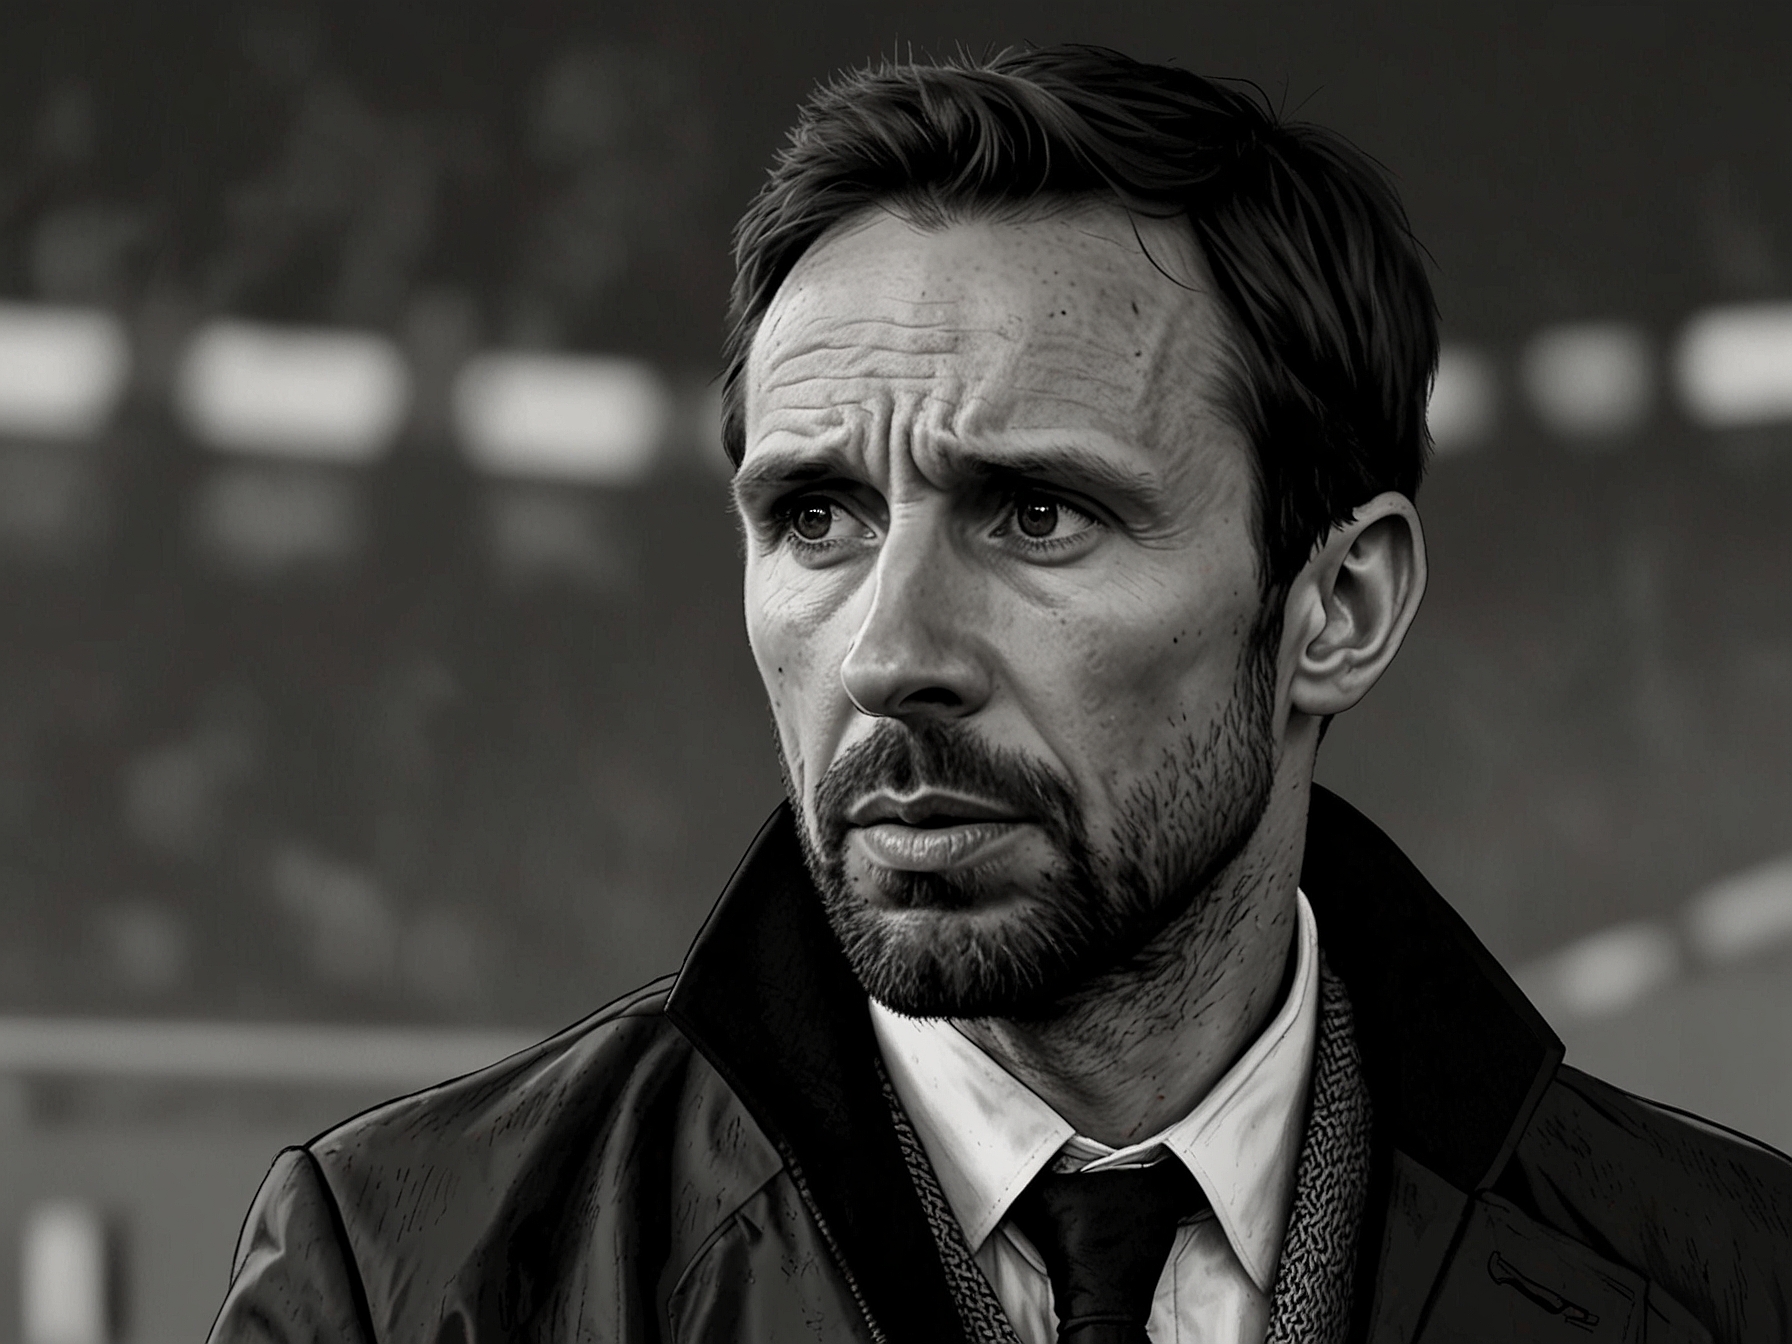 Gareth Southgate looks concerned on the sidelines during an England match, reflecting the pressure and criticism he faces as the team's manager amidst poor performances.